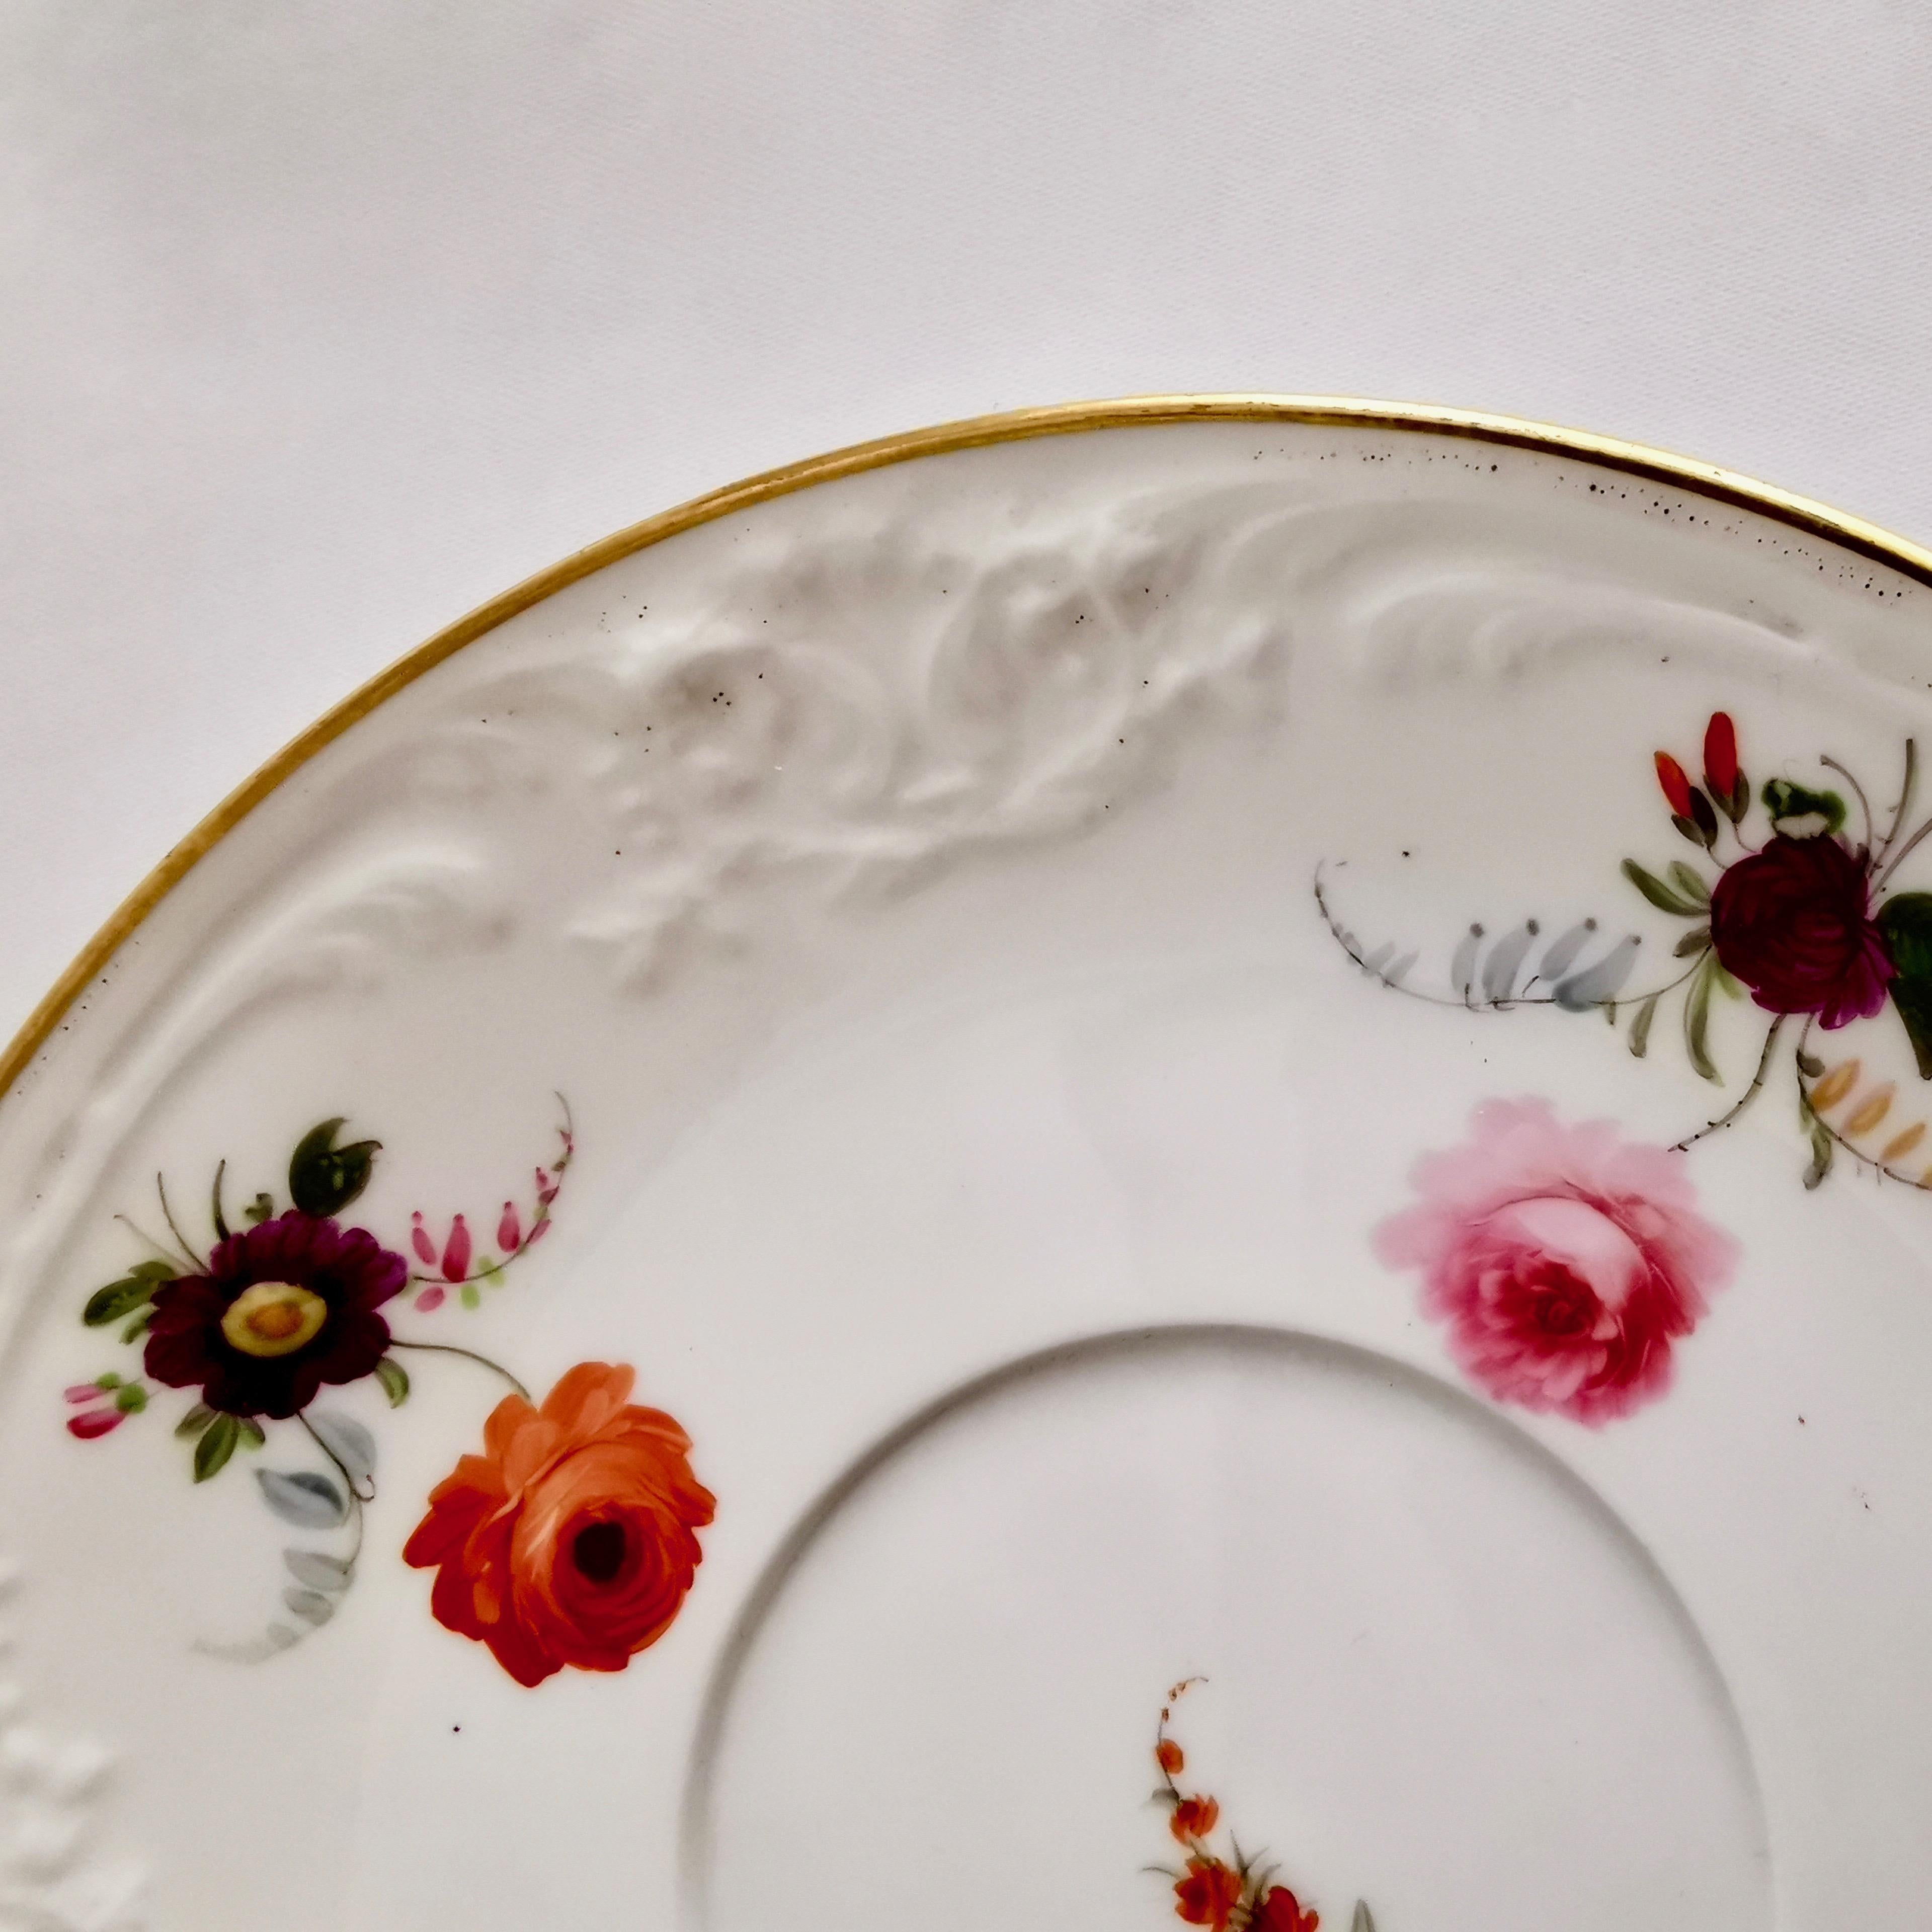 Davenport Porcelain Teacup, White with Hand Painted Flowers, circa 1820 2